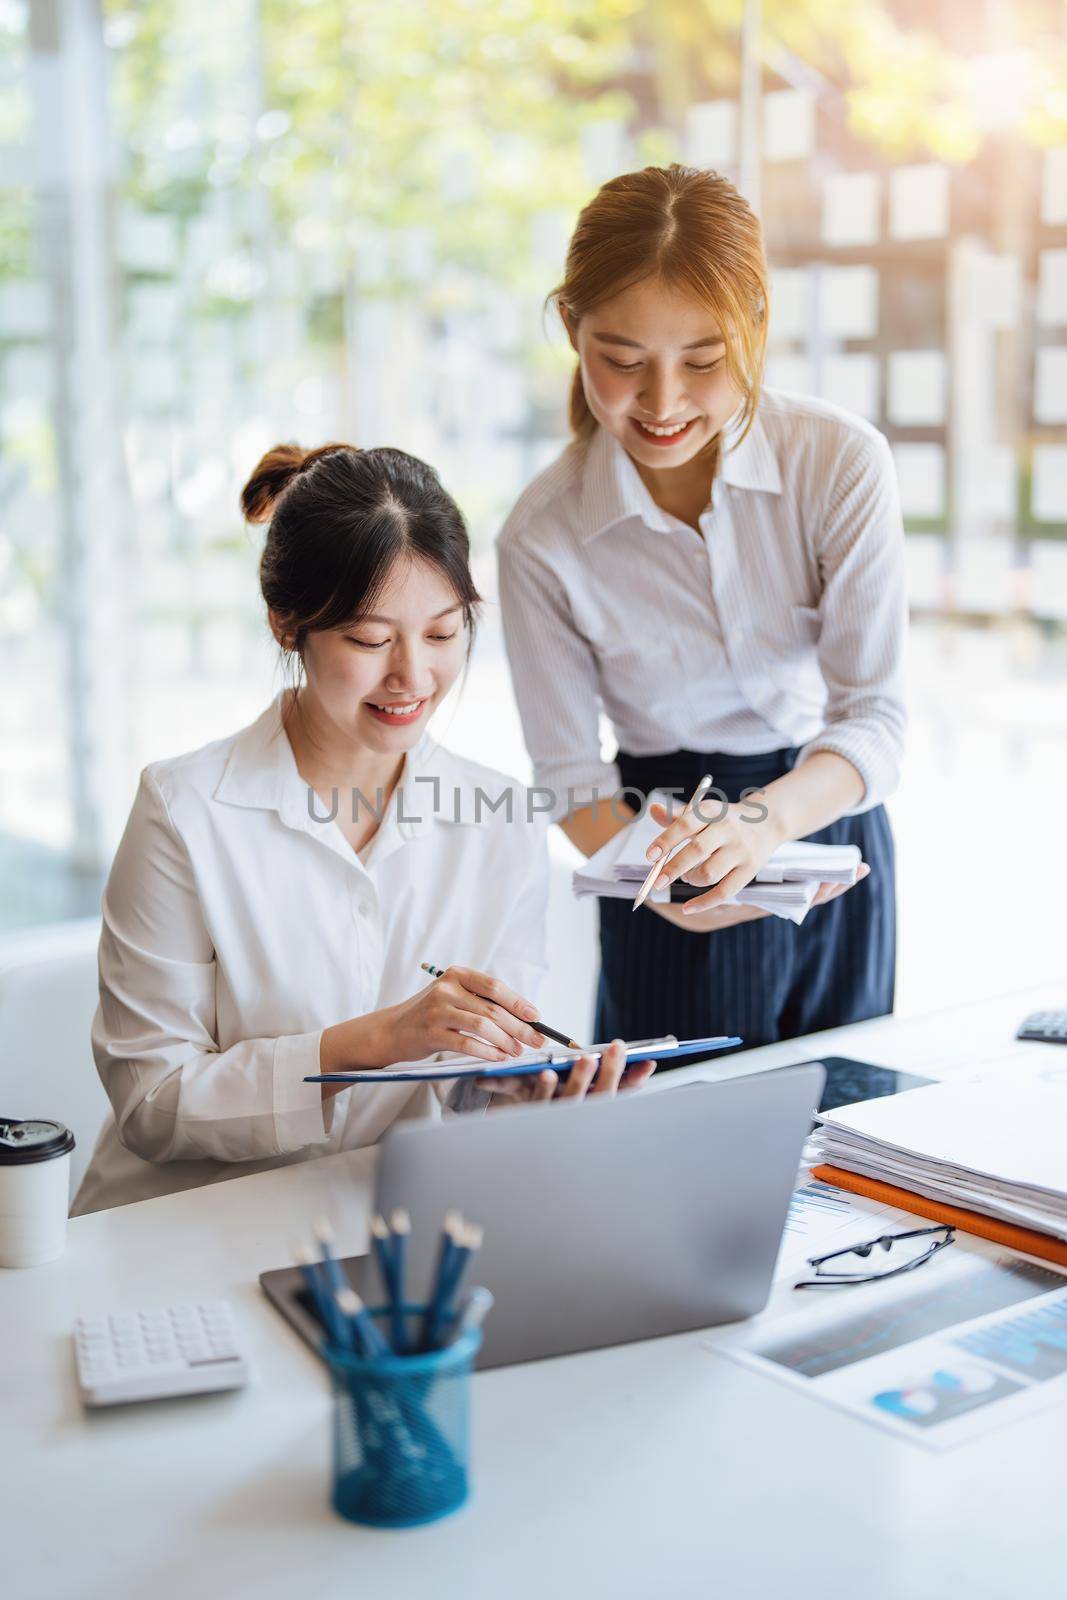 Negotiation, Analysis, Discussion: Portrait of an Asian woman economist and marketer pointing to a financial data sheet to plan investments to prevent risks and losses for the company by Manastrong